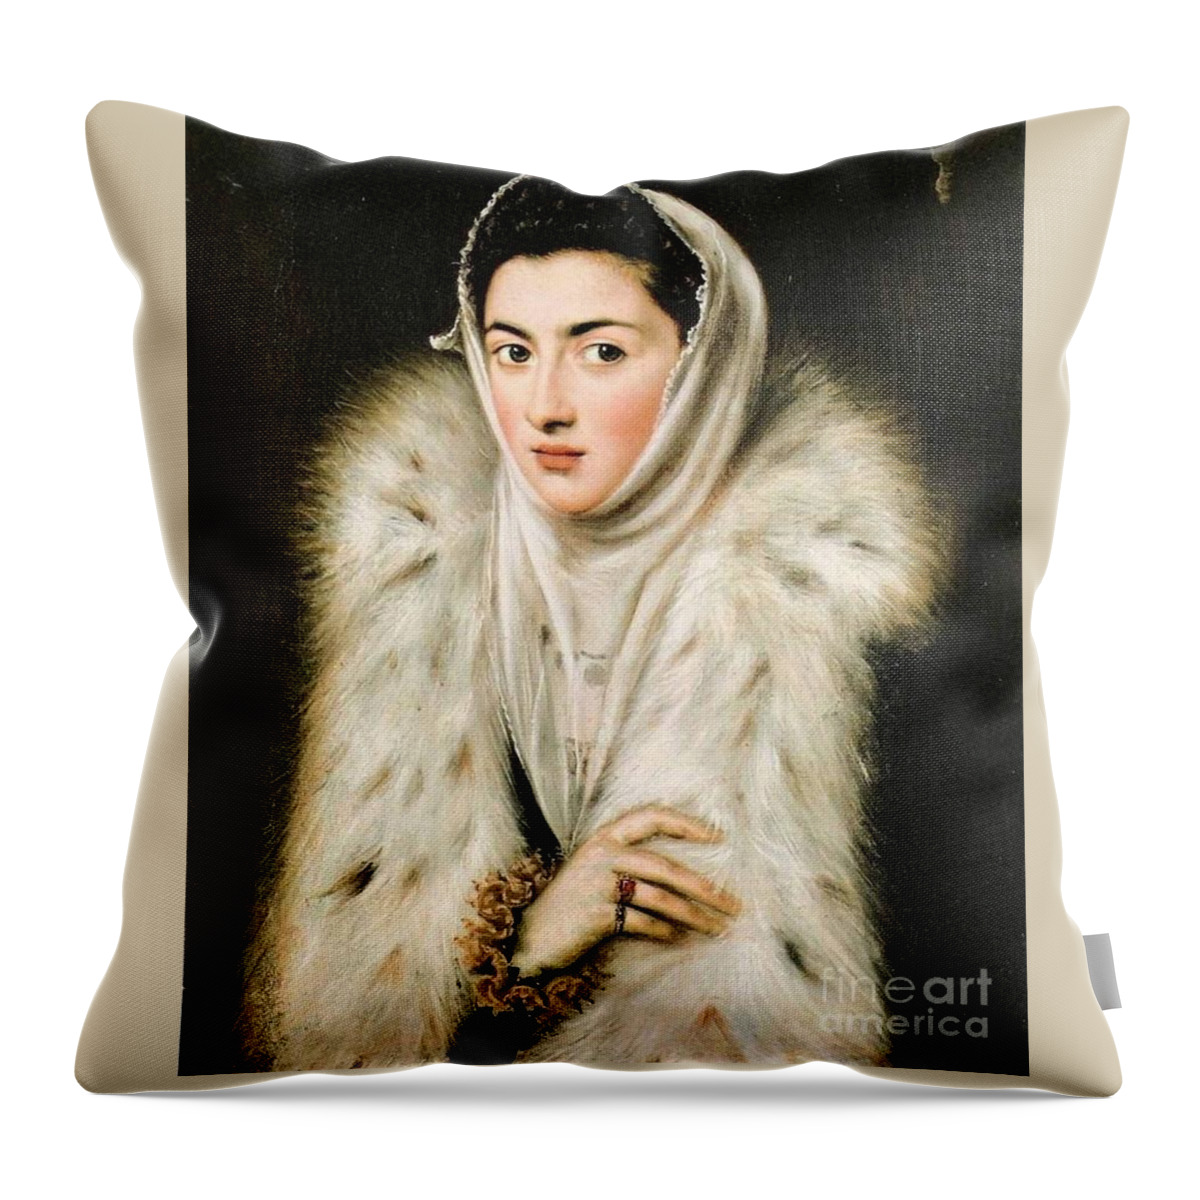 Greco - The Lady With An Ermine 1576-1577 Throw Pillow featuring the painting The Lady with an Ermine by MotionAge Designs